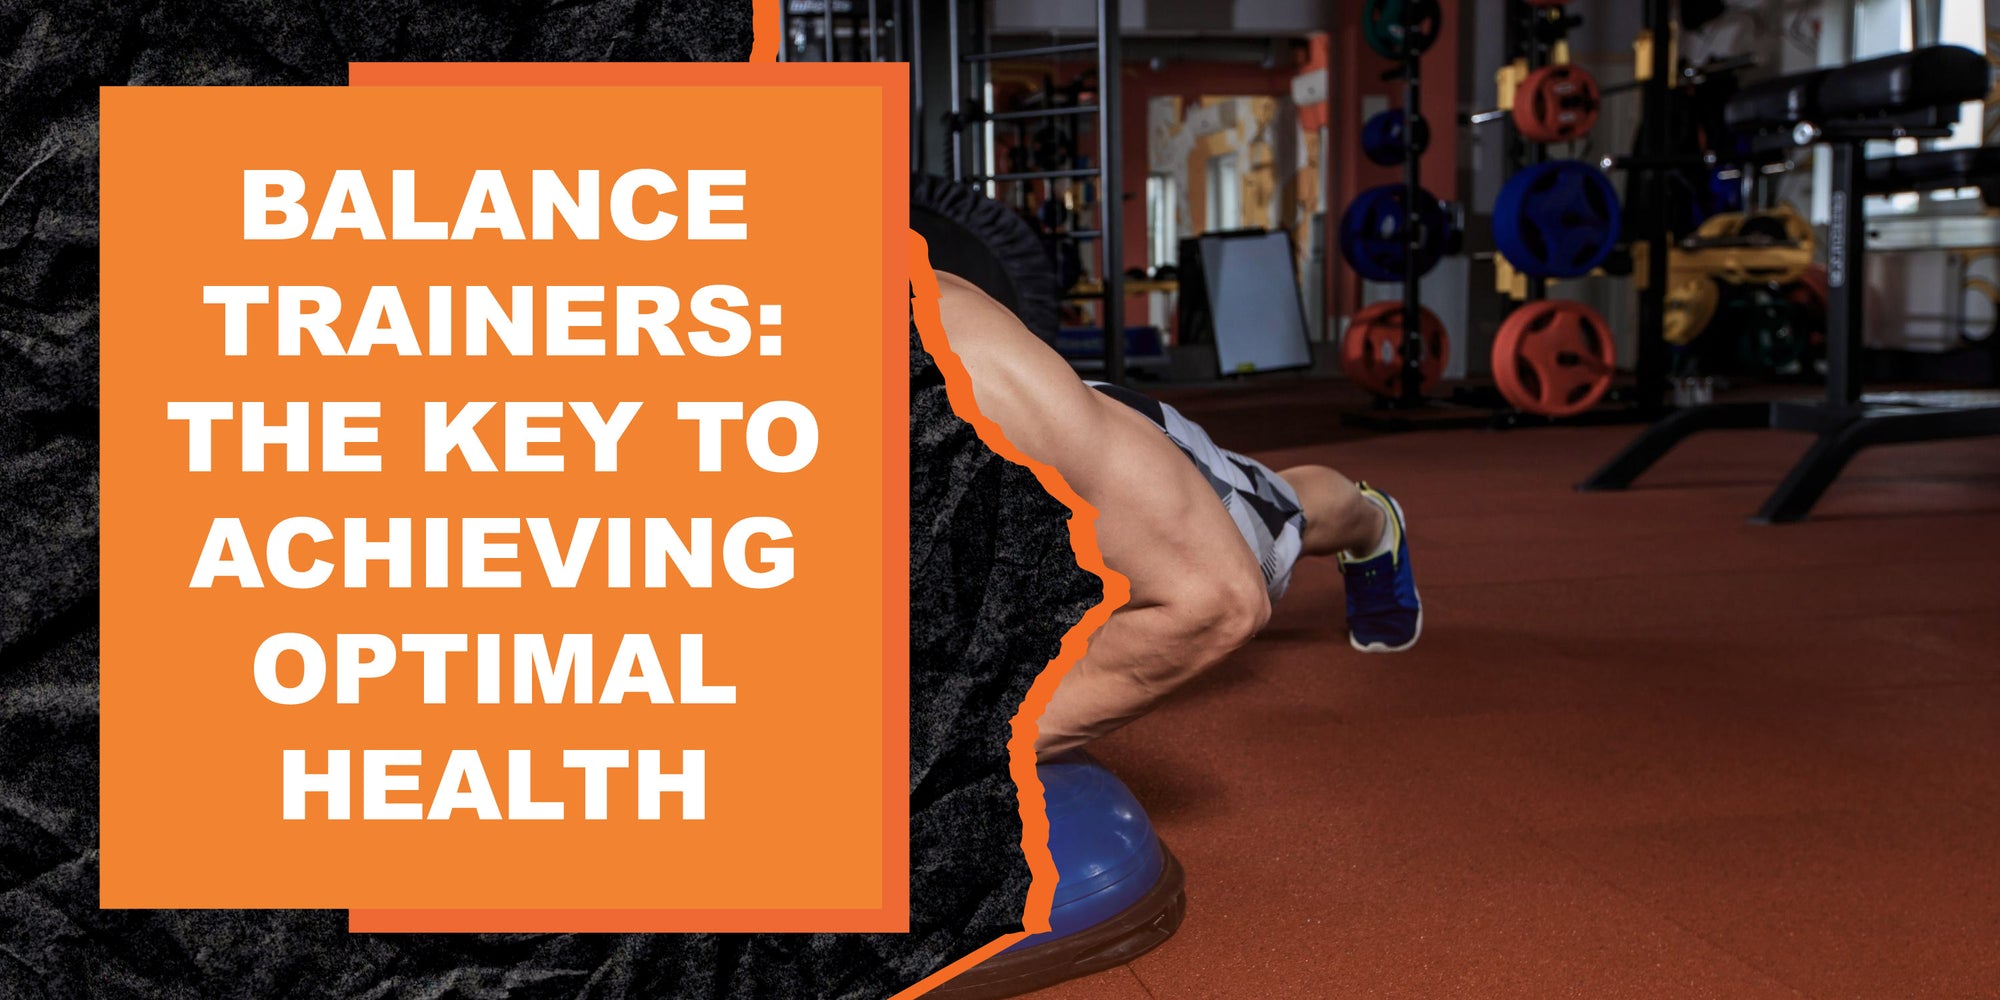 Balance Trainers: The Key to Achieving Optimal Health